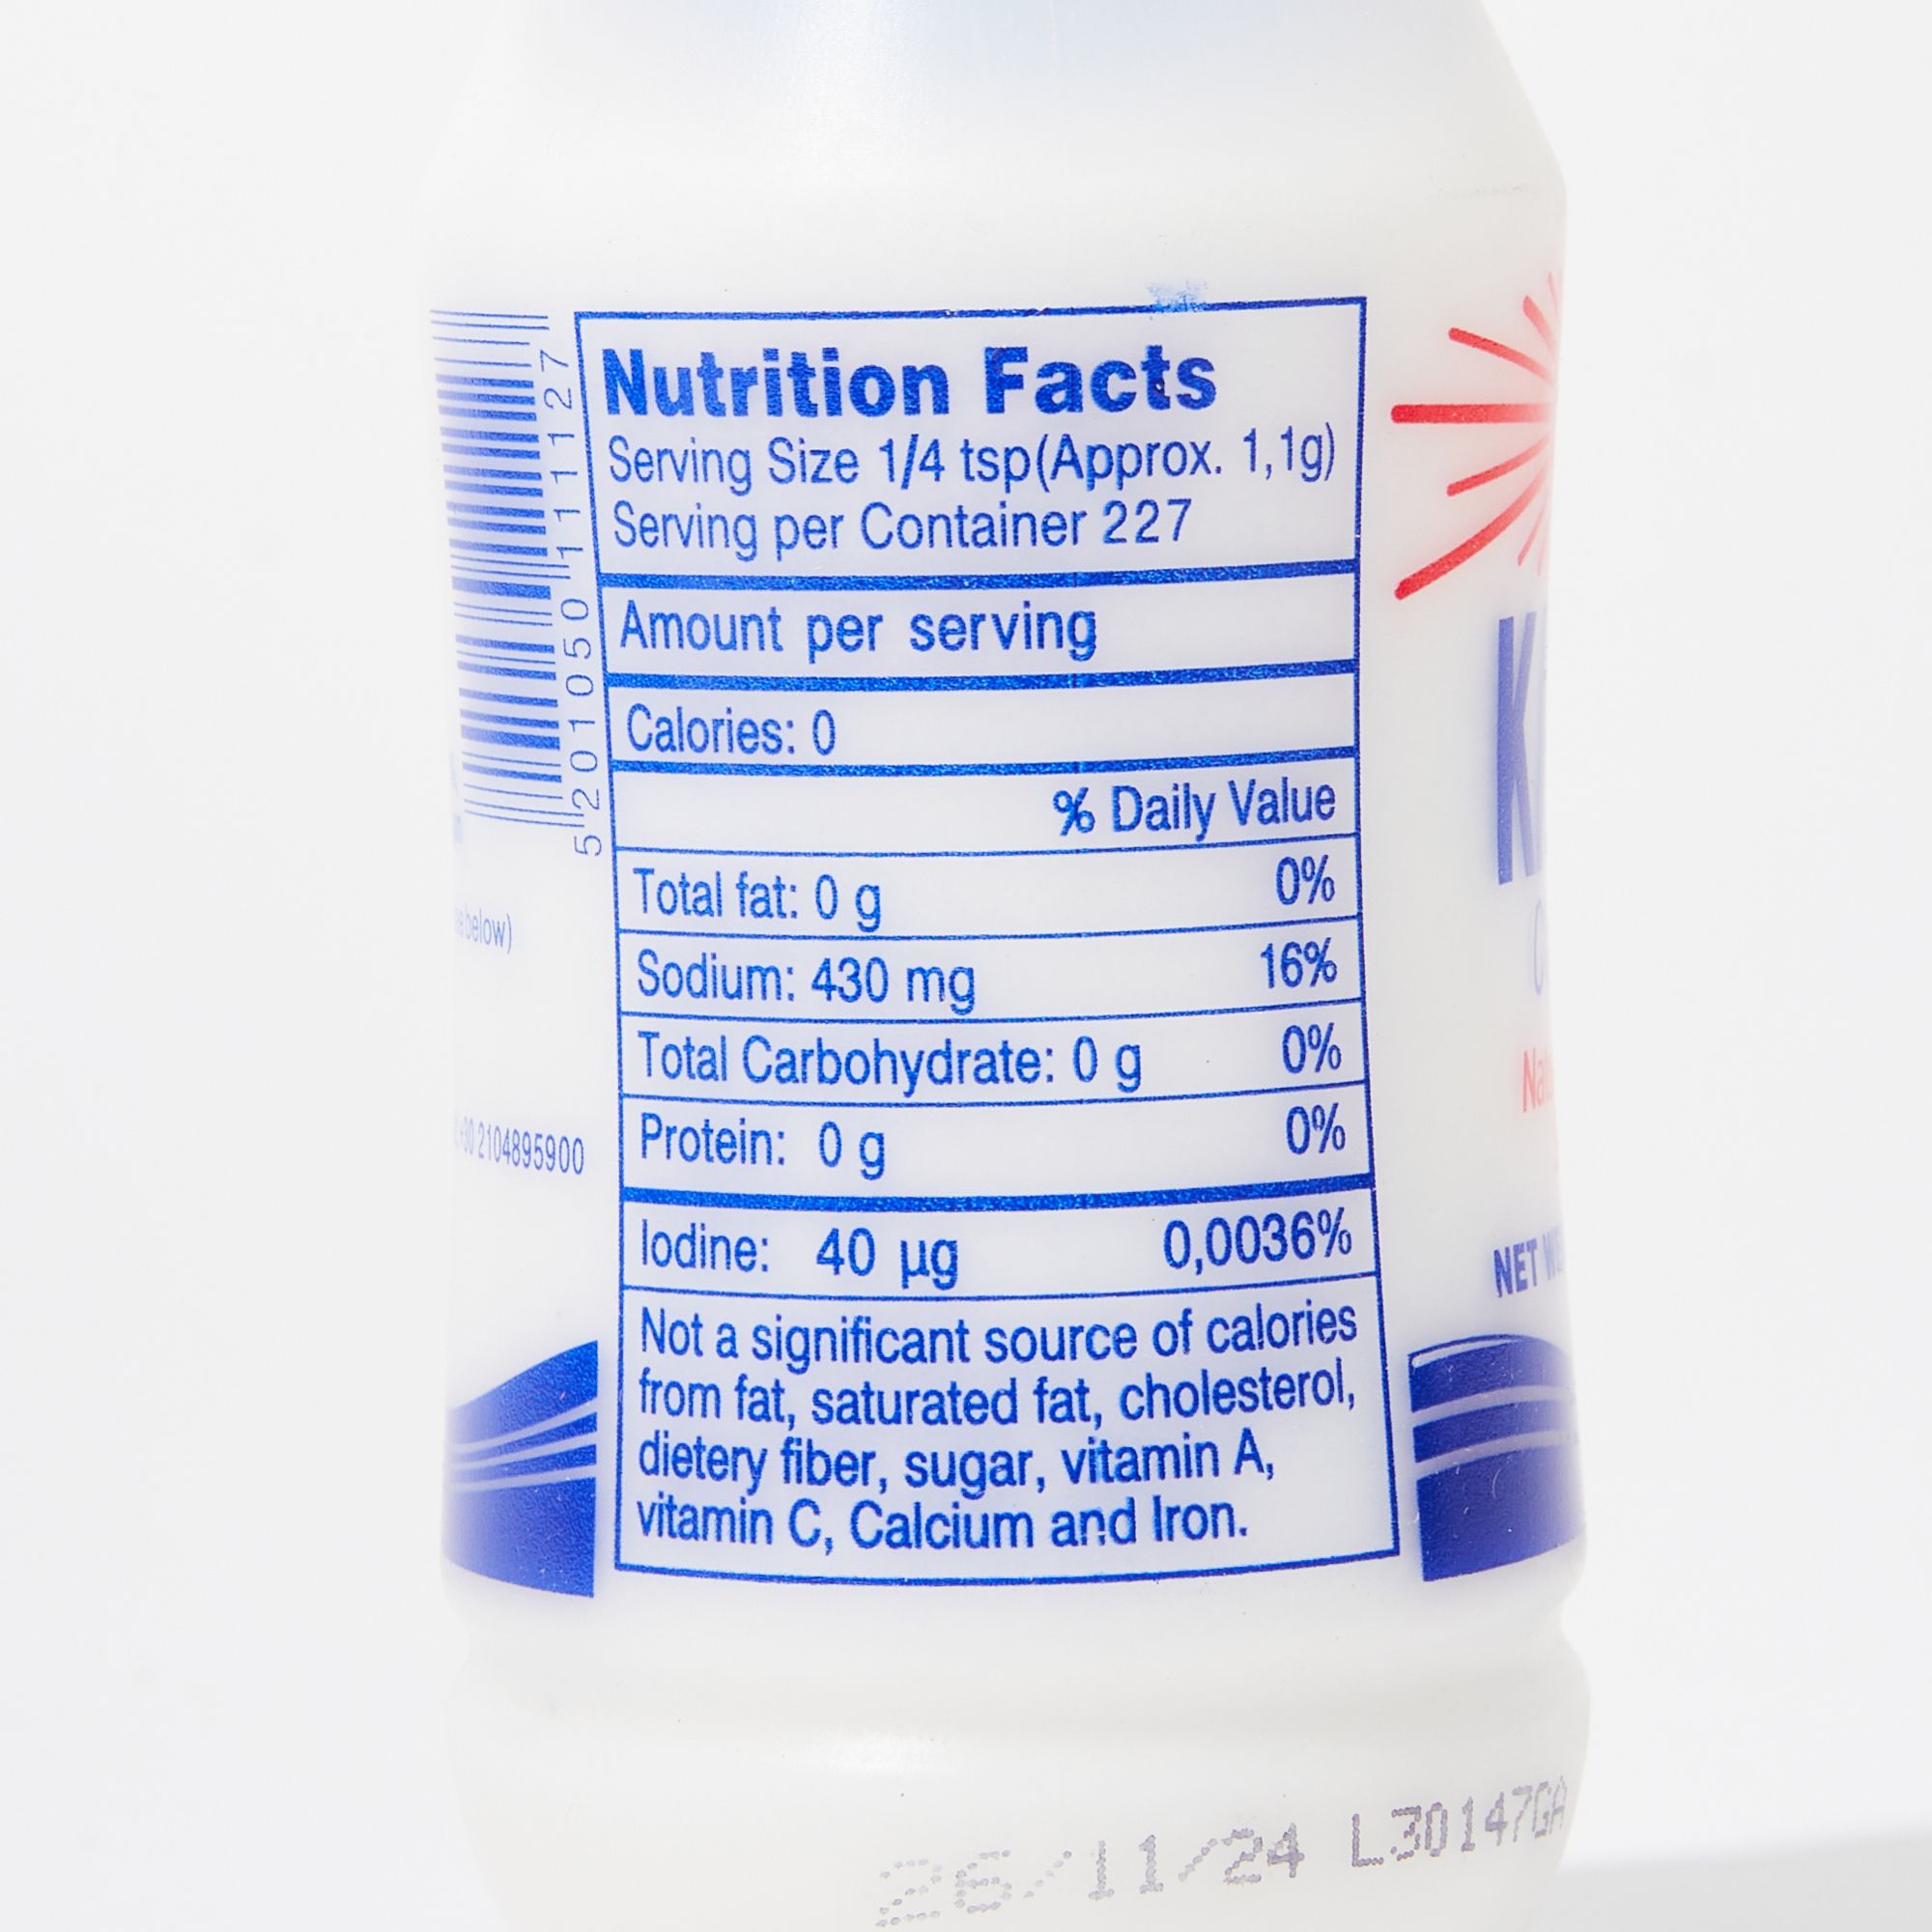 Close-up of a white translucent plastic bottle featuring nutritional facts in blue